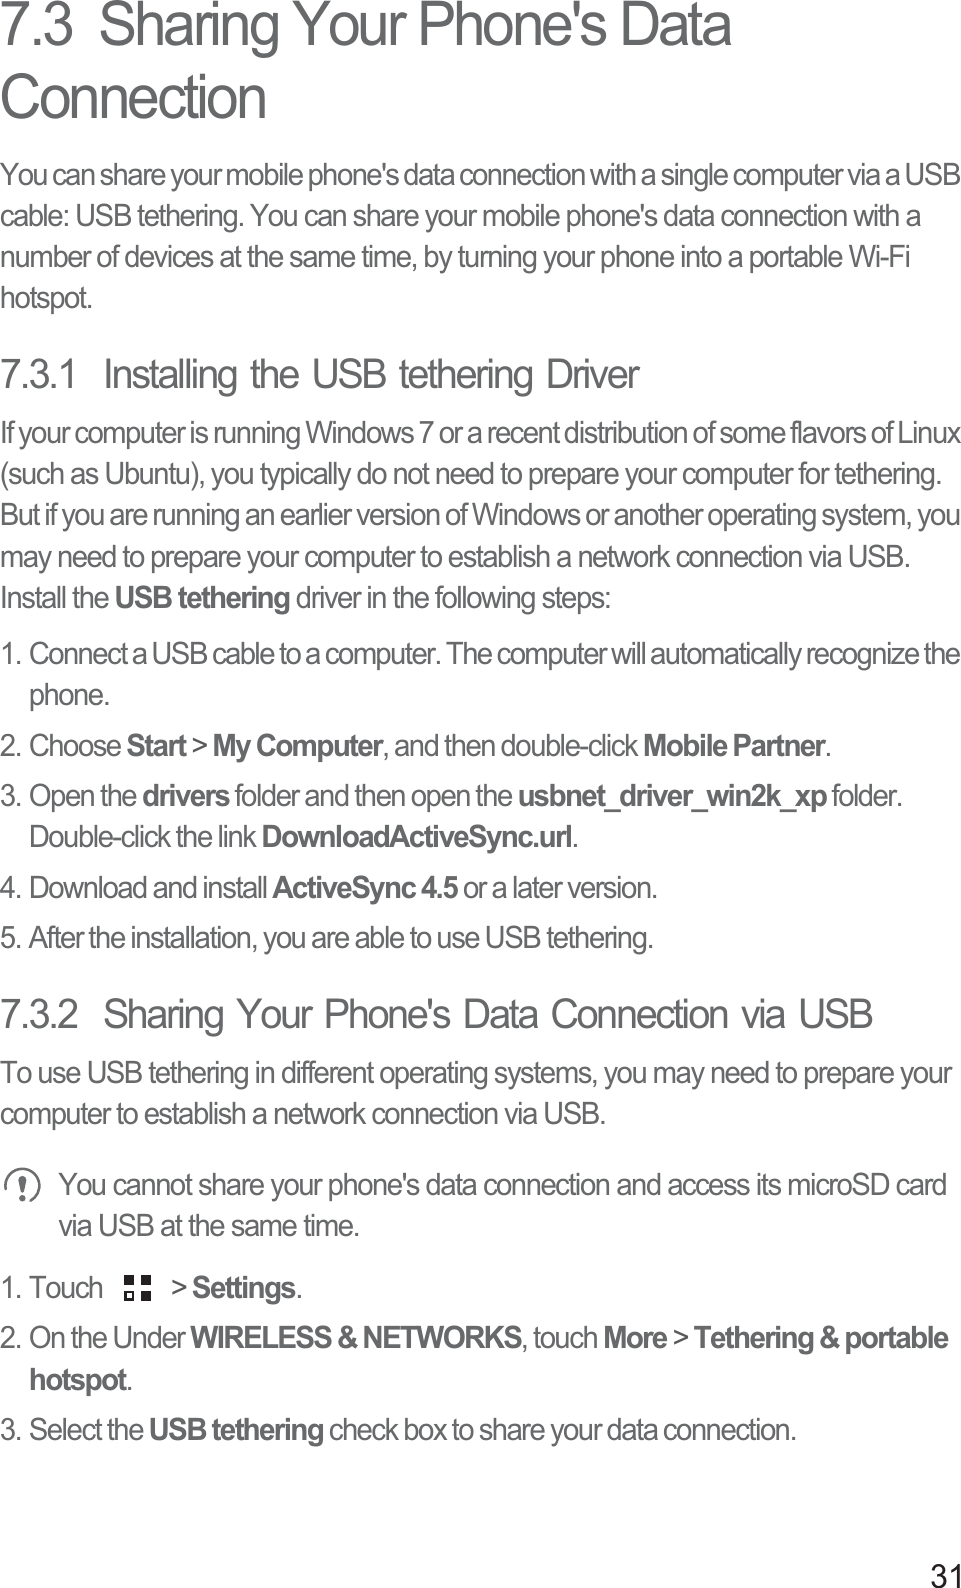 317.3  Sharing Your Phone&apos;s Data ConnectionYou can share your mobile phone&apos;s data connection with a single computer via a USB cable: USB tethering. You can share your mobile phone&apos;s data connection with a number of devices at the same time, by turning your phone into a portable Wi-Fi hotspot.7.3.1  Installing the USB tethering DriverIf your computer is running Windows 7 or a recent distribution of some flavors of Linux (such as Ubuntu), you typically do not need to prepare your computer for tethering. But if you are running an earlier version of Windows or another operating system, you may need to prepare your computer to establish a network connection via USB.Install the USB tethering driver in the following steps:1. Connect a USB cable to a computer. The computer will automatically recognize the phone.2. Choose Start &gt; My Computer, and then double-click Mobile Partner.3. Open the drivers folder and then open the usbnet_driver_win2k_xp folder. Double-click the link DownloadActiveSync.url.4. Download and install ActiveSync 4.5 or a later version.5. After the installation, you are able to use USB tethering.7.3.2  Sharing Your Phone&apos;s Data Connection via USBTo use USB tethering in different operating systems, you may need to prepare your computer to establish a network connection via USB. You cannot share your phone&apos;s data connection and access its microSD card via USB at the same time.1. Touch   &gt; Settings.2. On the Under WIRELESS &amp; NETWORKS, touch More &gt; Tethering &amp; portable hotspot. 3. Select the USB tethering check box to share your data connection.